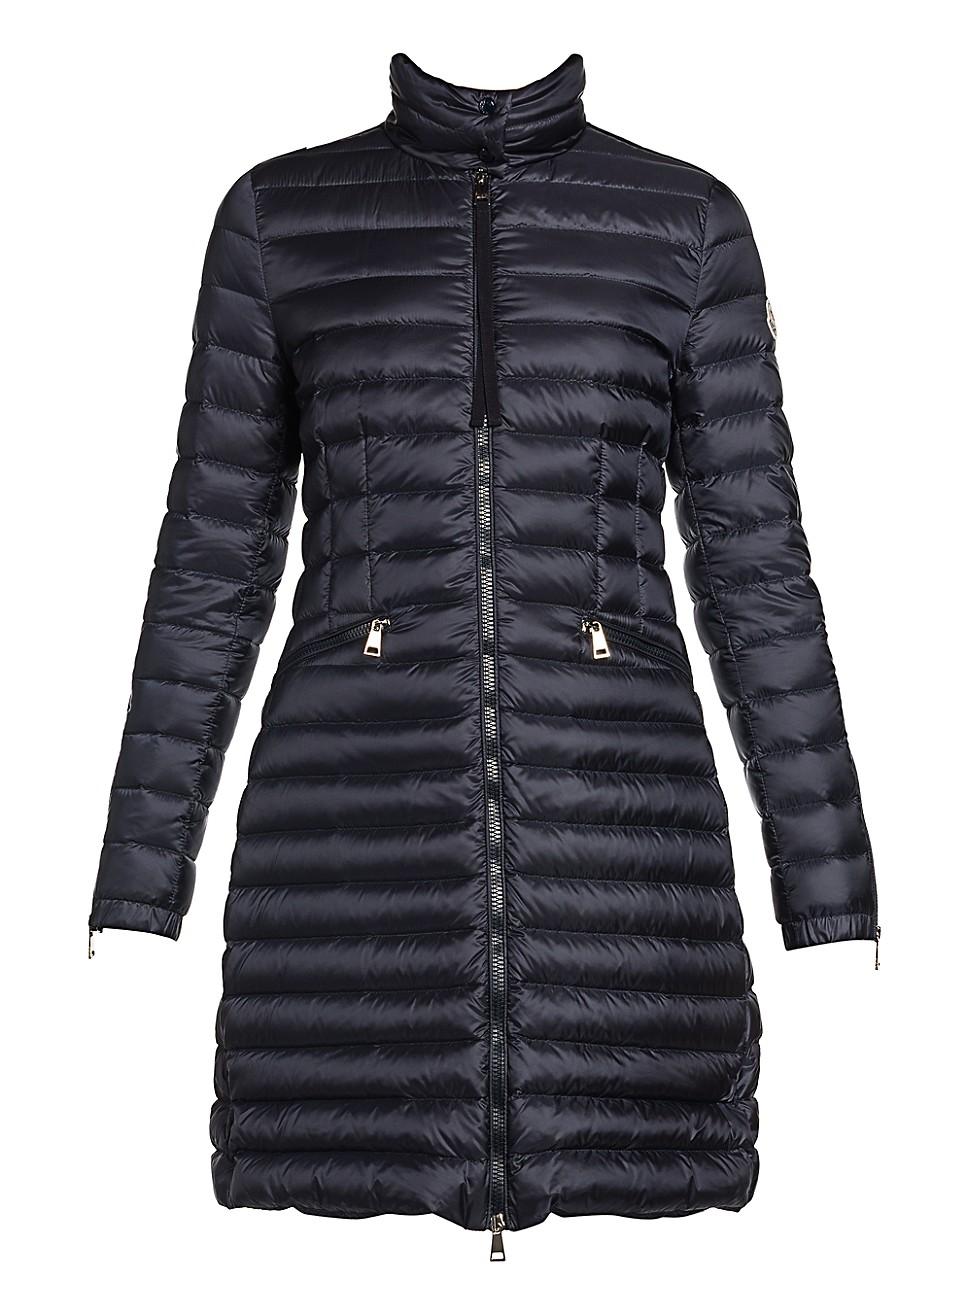 Moncler Sable Giubbotto Zip-cuff Puffer Jacket in Blue | Lyst